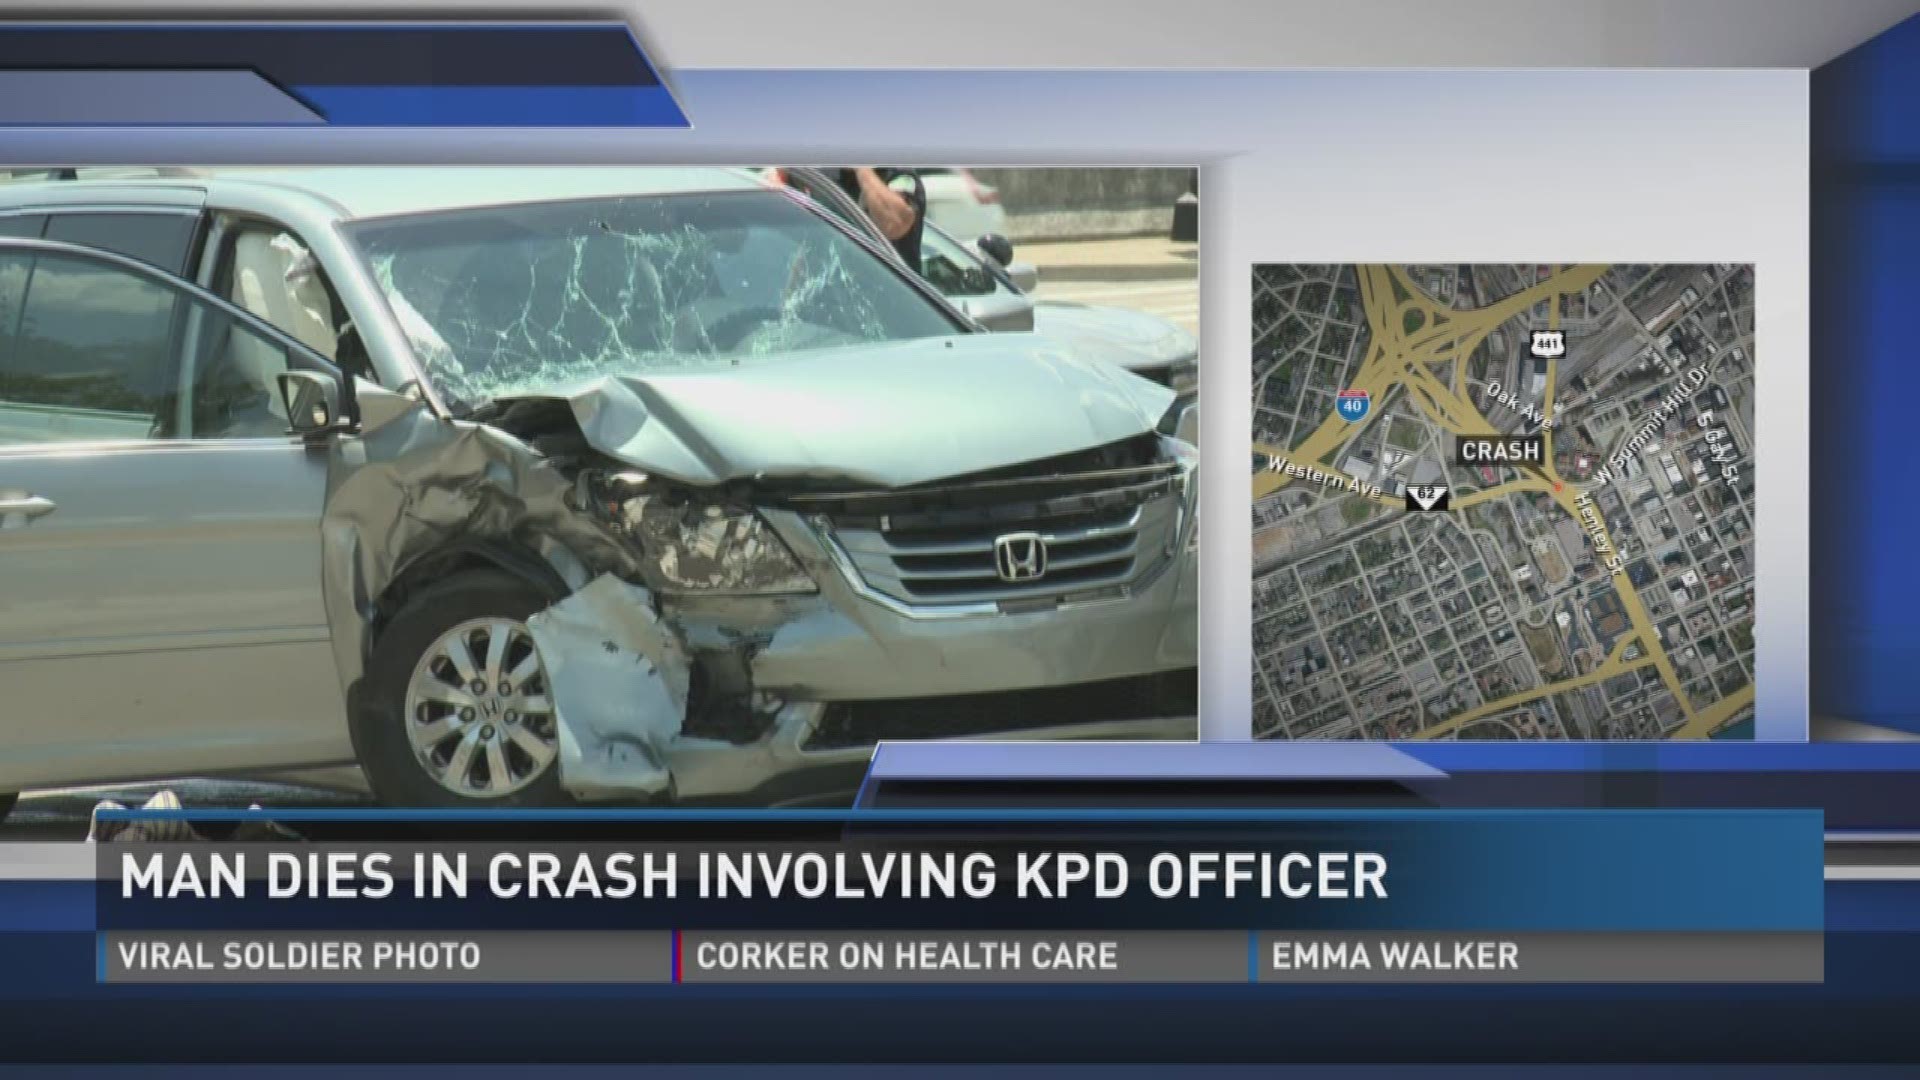 The Knoxville Police Department has said the driver involved in the crash with an officer has died.